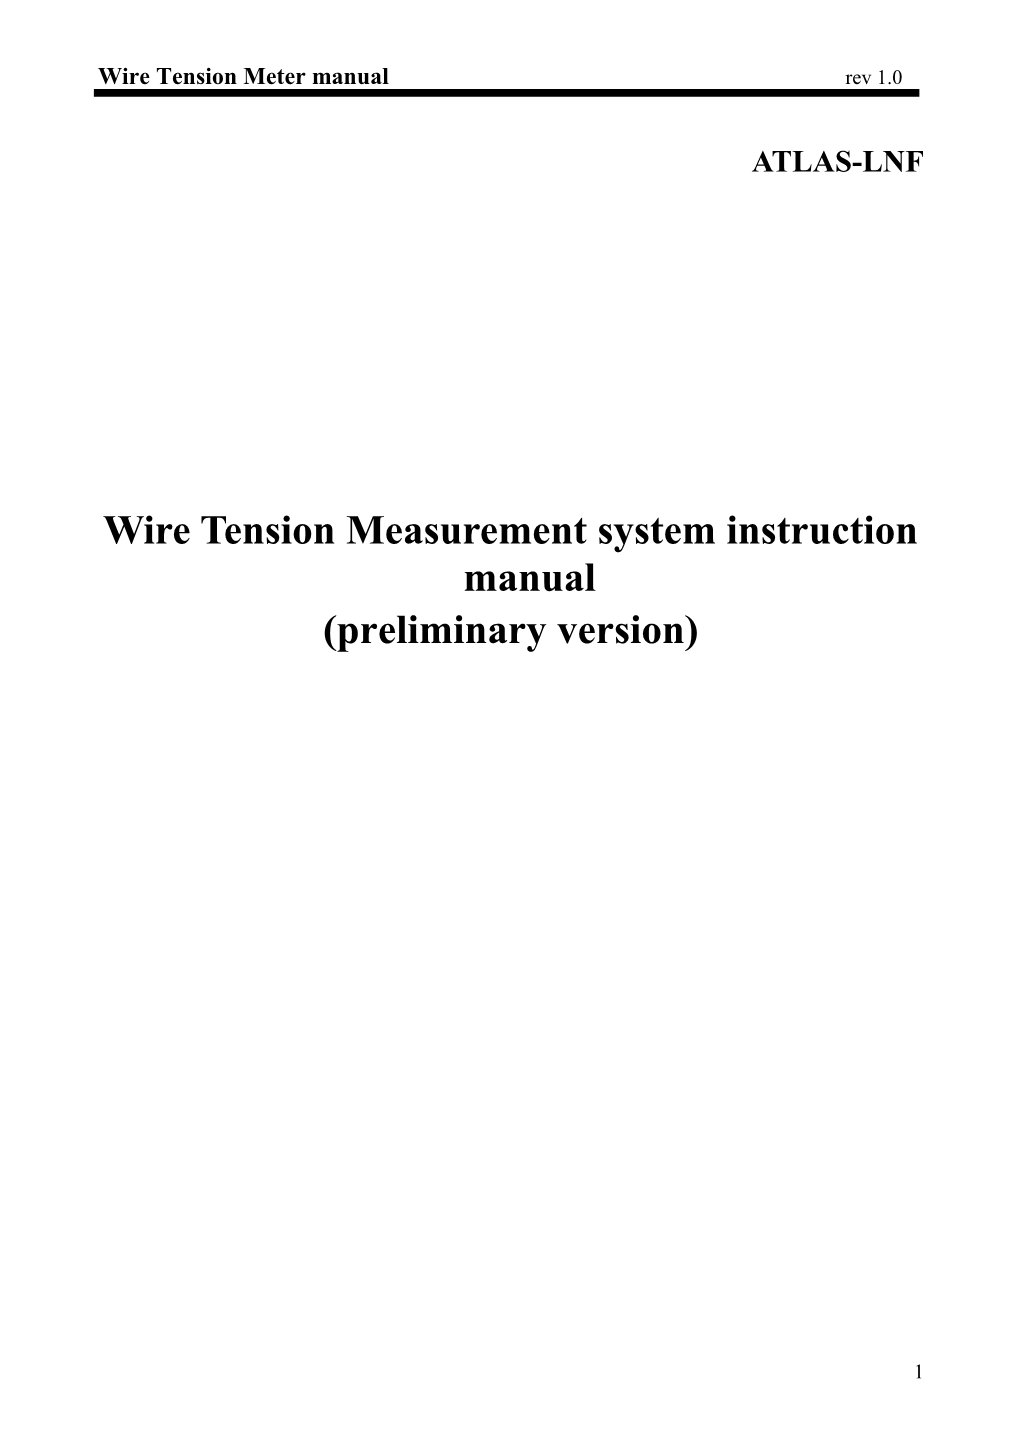 Wire Tension Measurement System